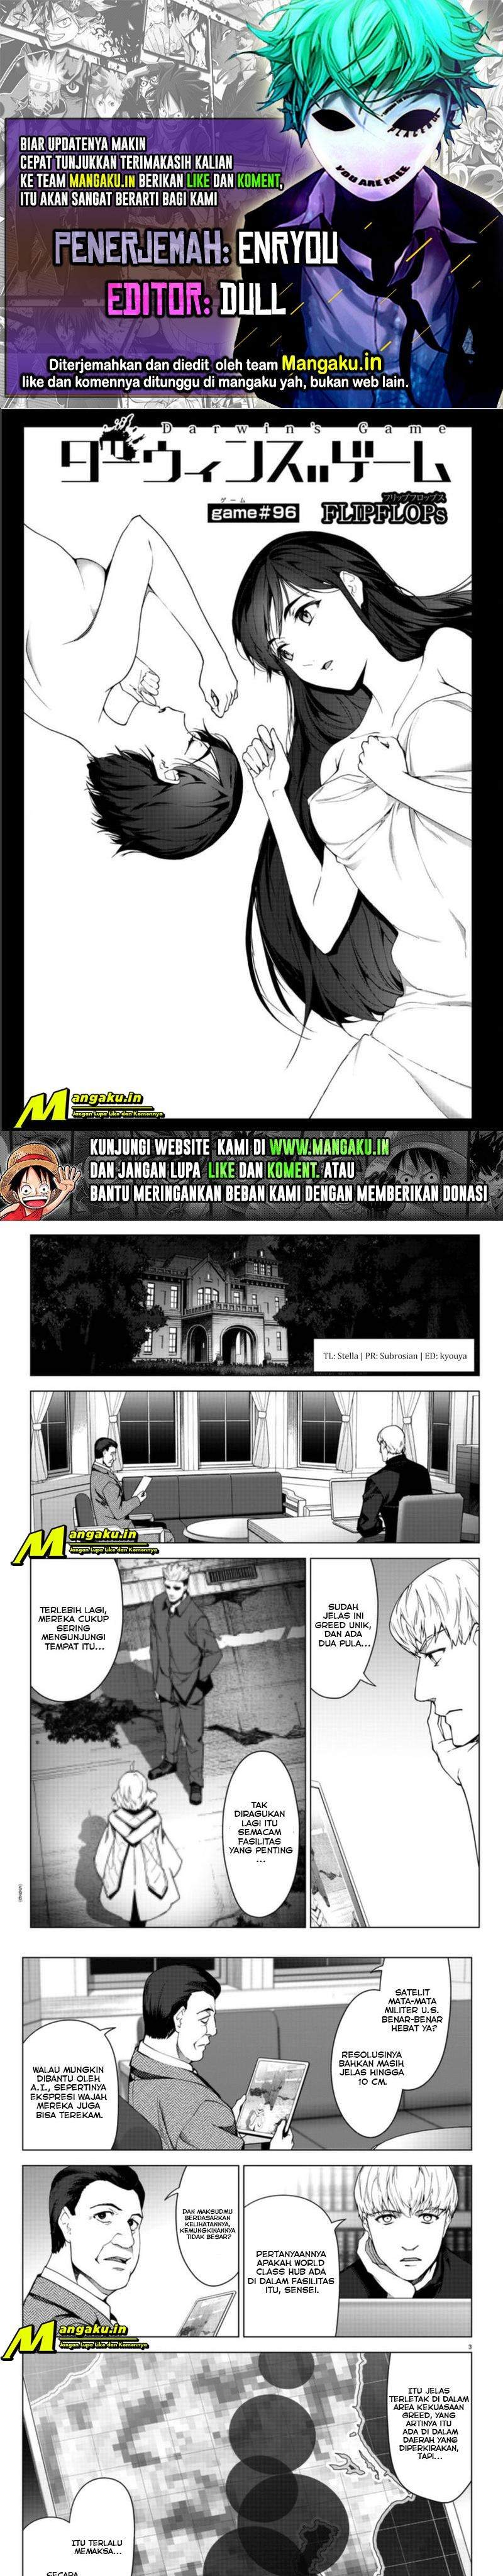 Darwin’s Game Chapter 96-1